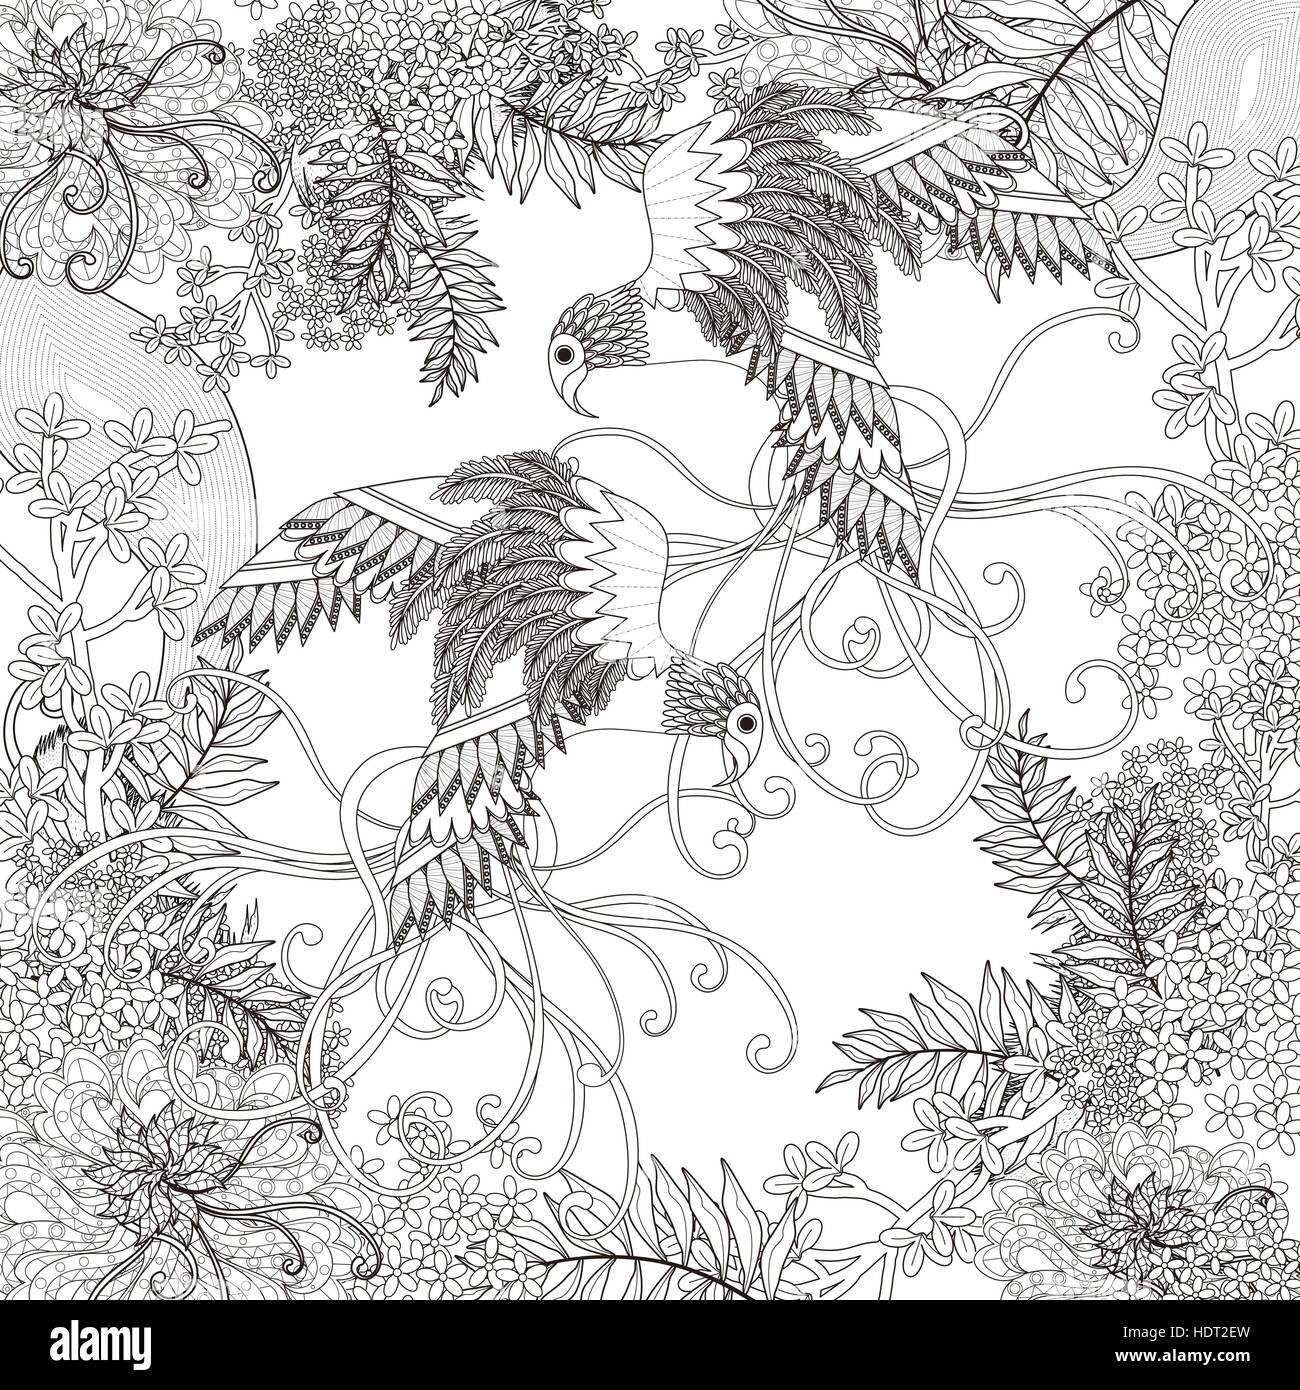 beautiful flying bird coloring page with floral elements in exquisite ...